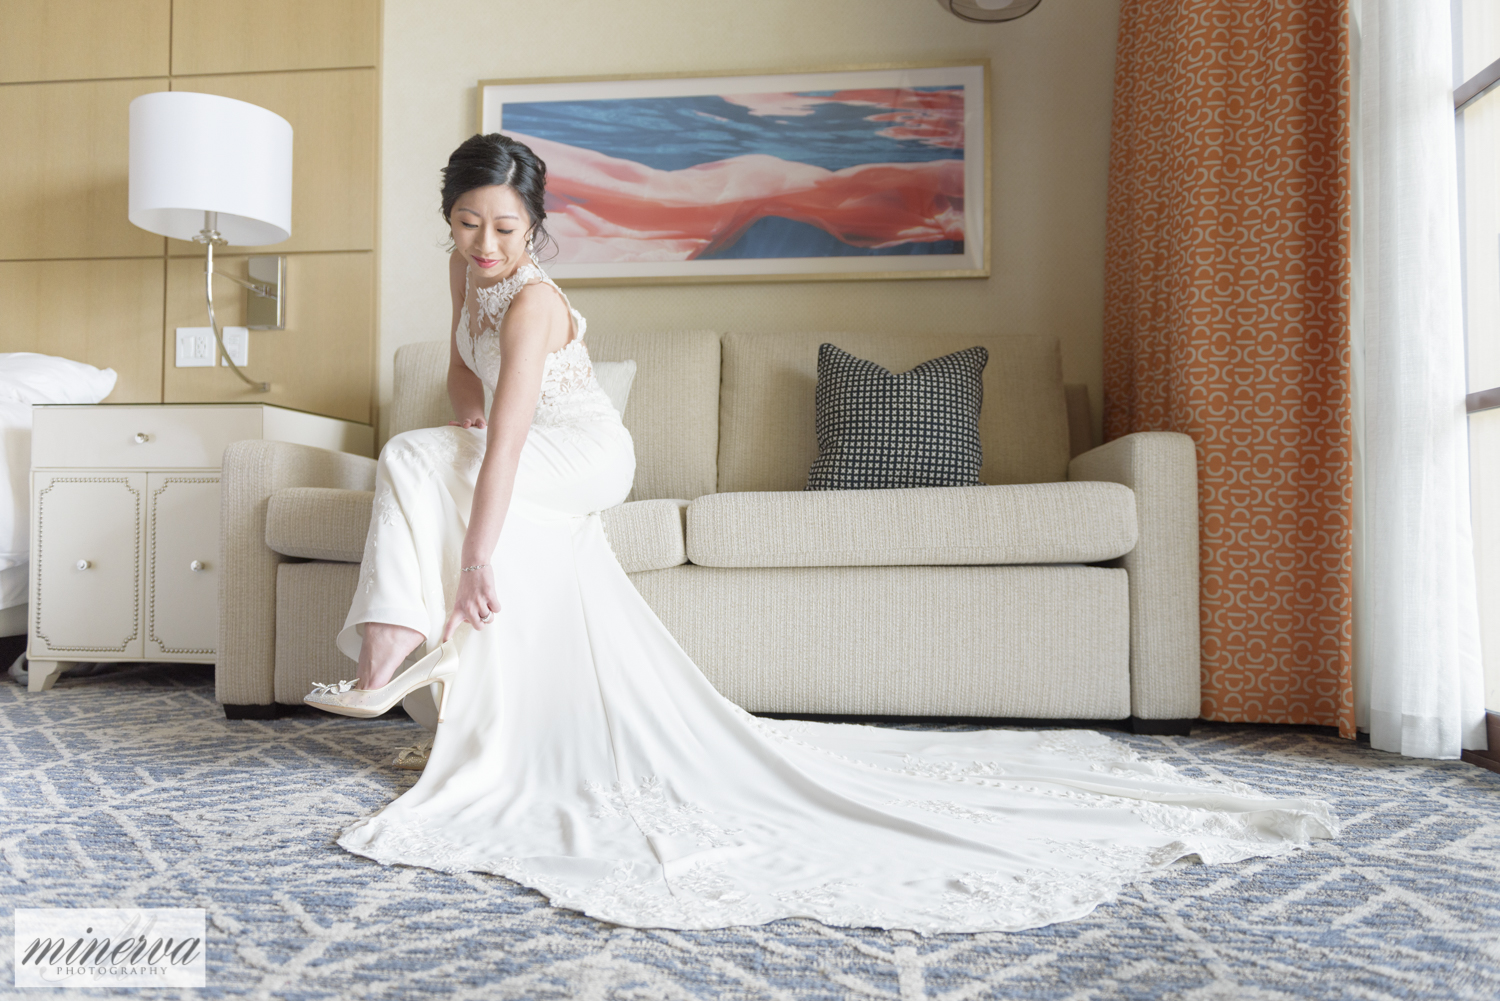 087_chinese-tea-ceremony_red-dress_four-seasons-resort-orlando_walt-disney-world_wedding_first-look_staircase_central-florida-photographer_luxury-photography